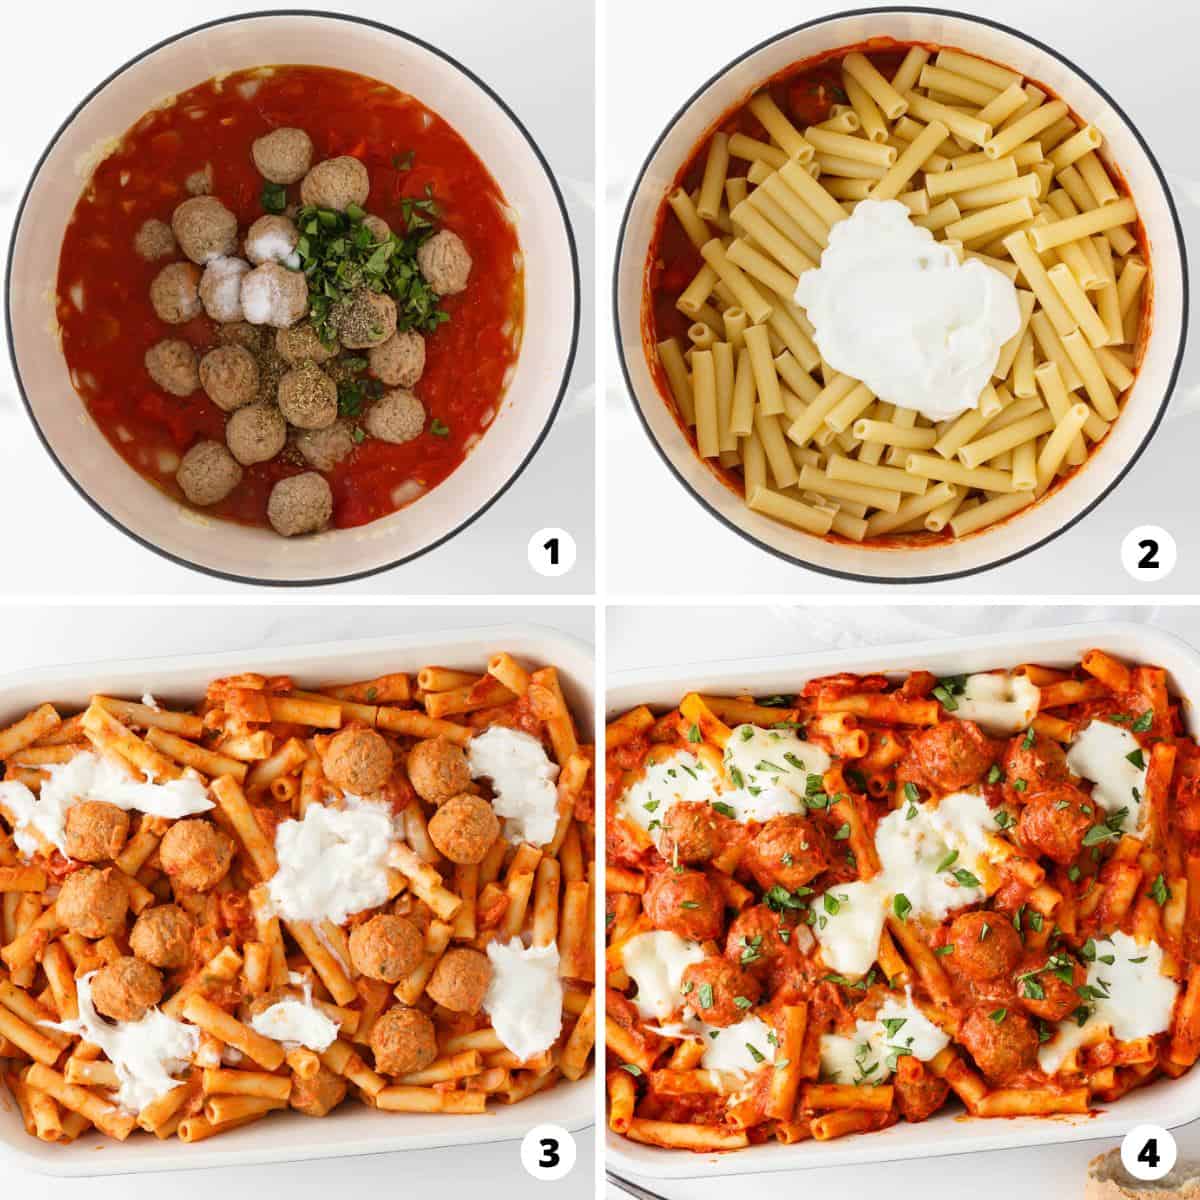 Showing how to make baked ziti with meatballs in a 4 step collage.